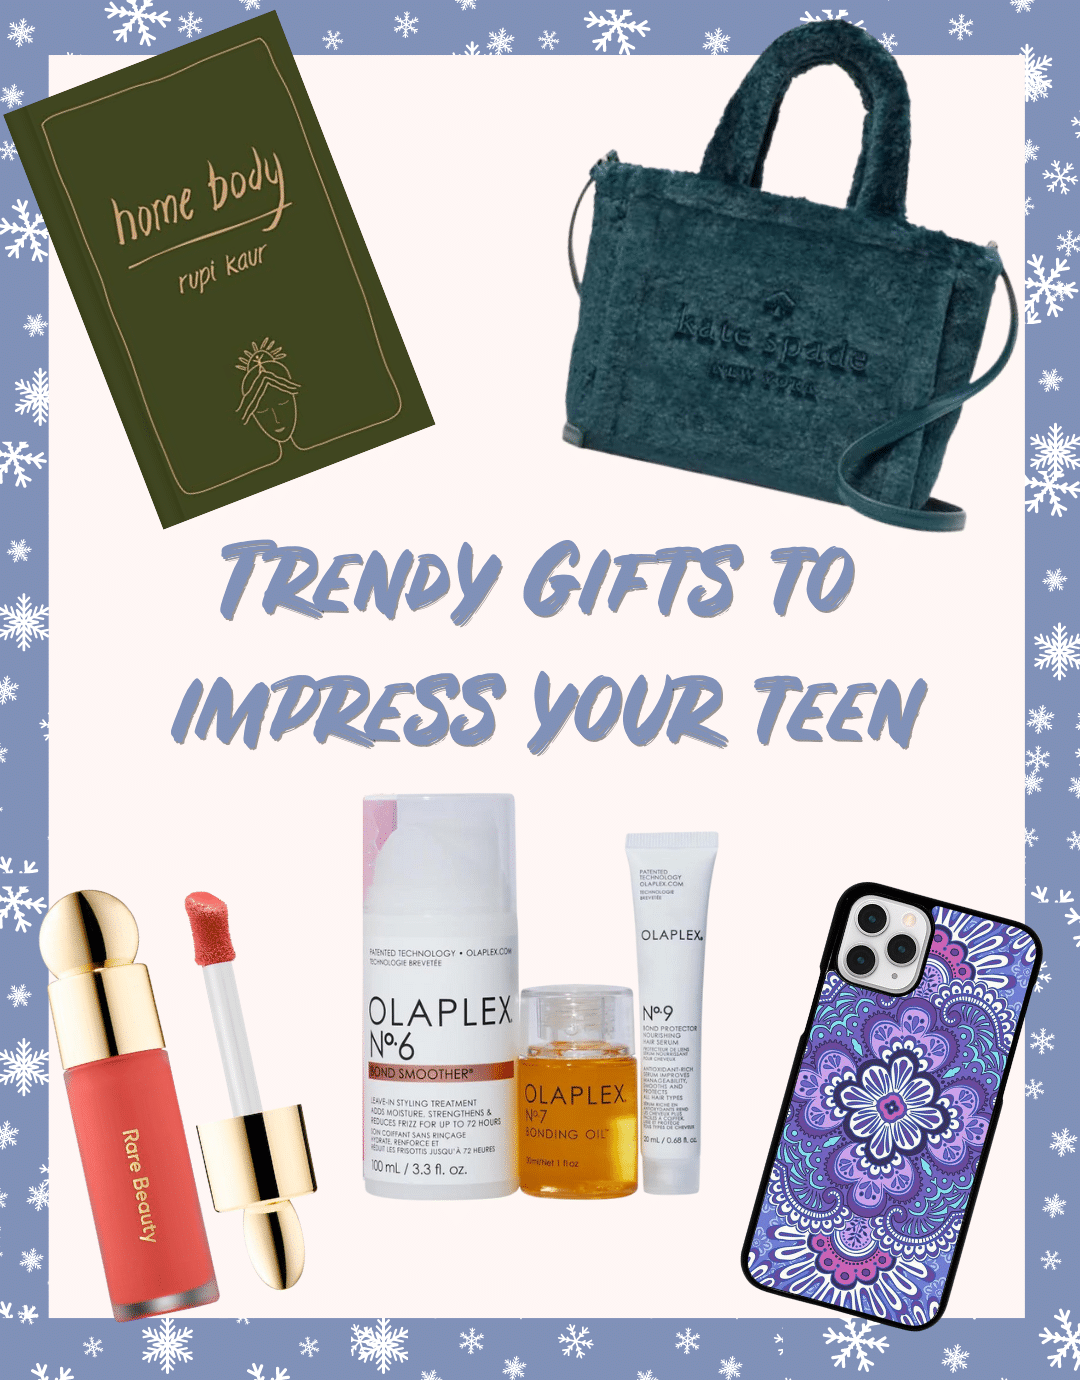 Holiday Gift Guide: Gifts to Impress Your Teen - Legends Outlets Kansas  City - Outlet Mall, Deals, Restaurants, Entertainment, Events and Activities